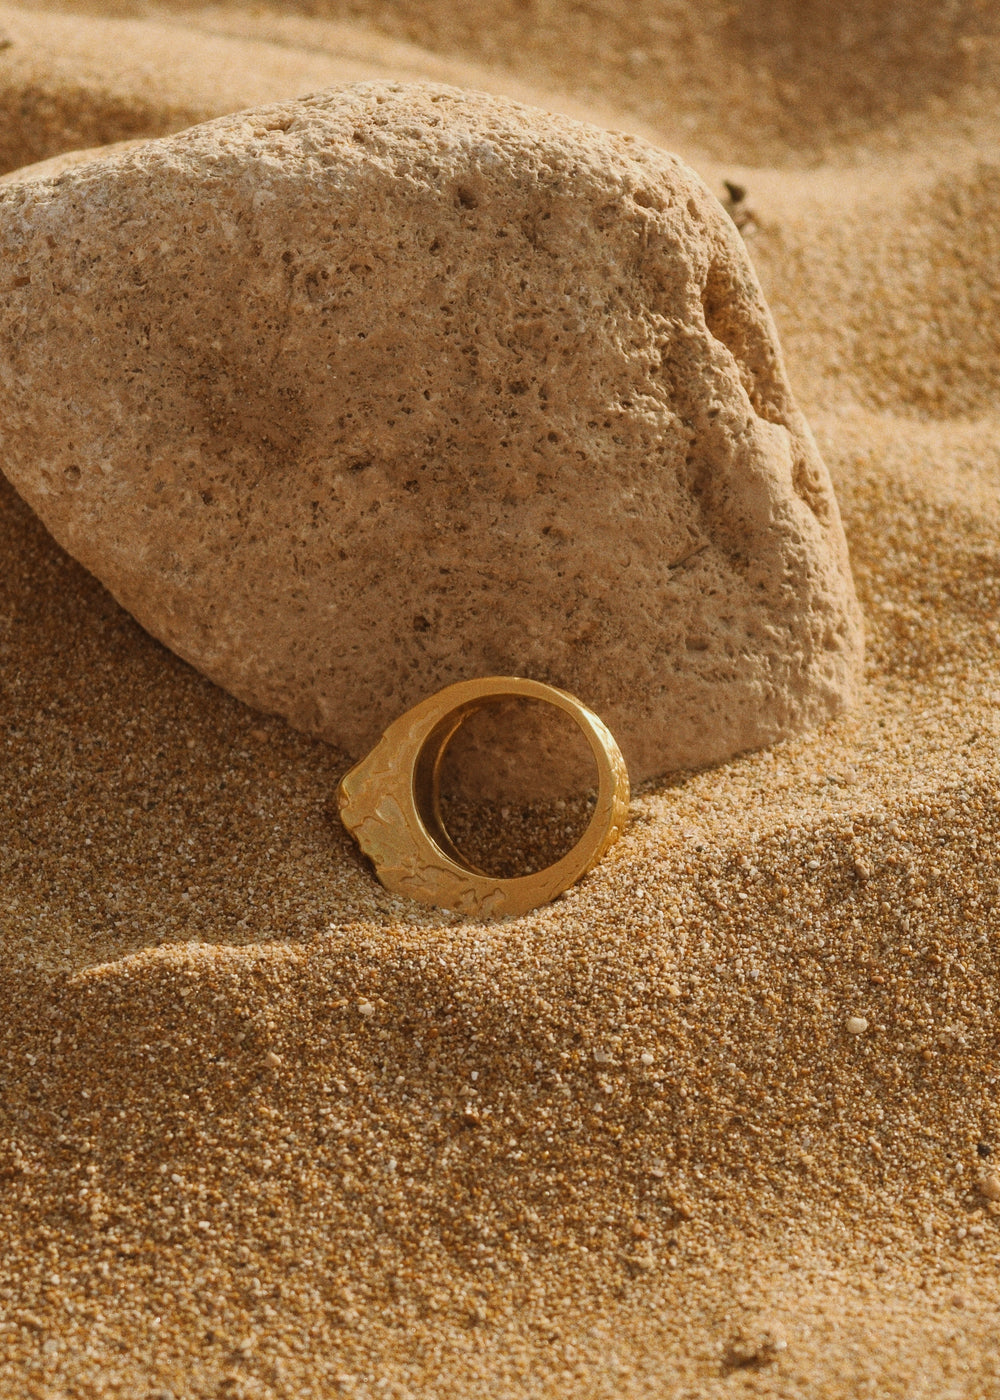 A DIVON Cracked Ring sits on top of a rock in the sand.